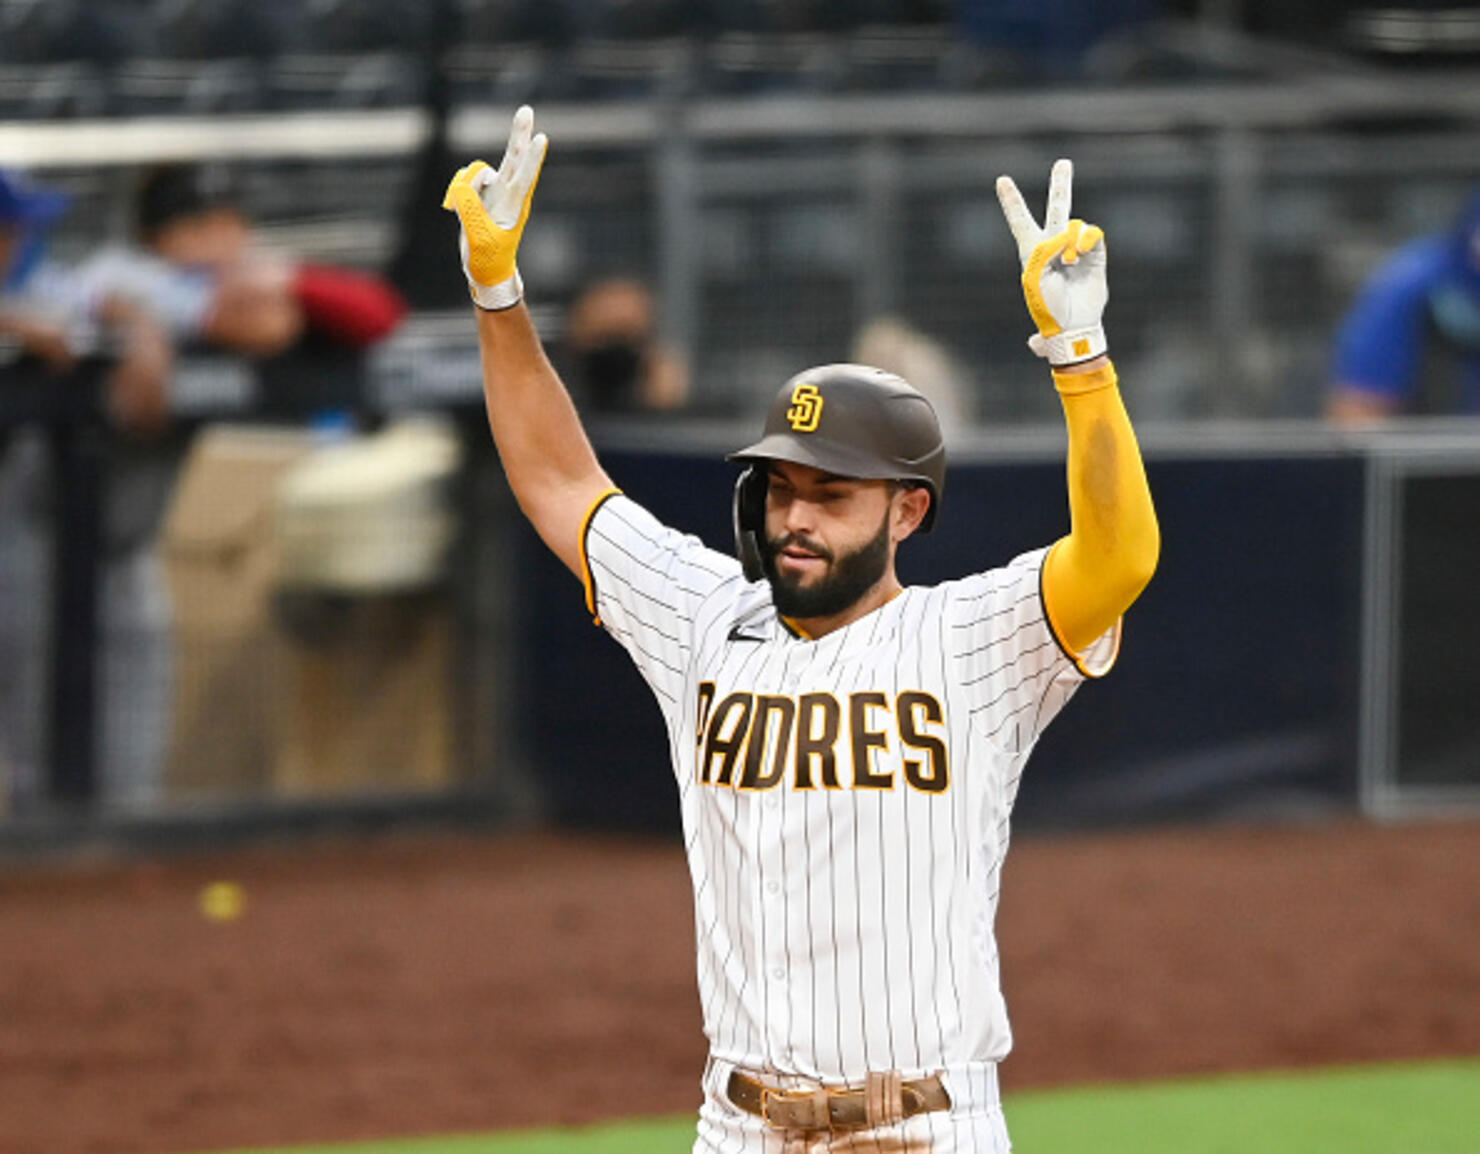 Padres sign Motorola to first MLB patch deal